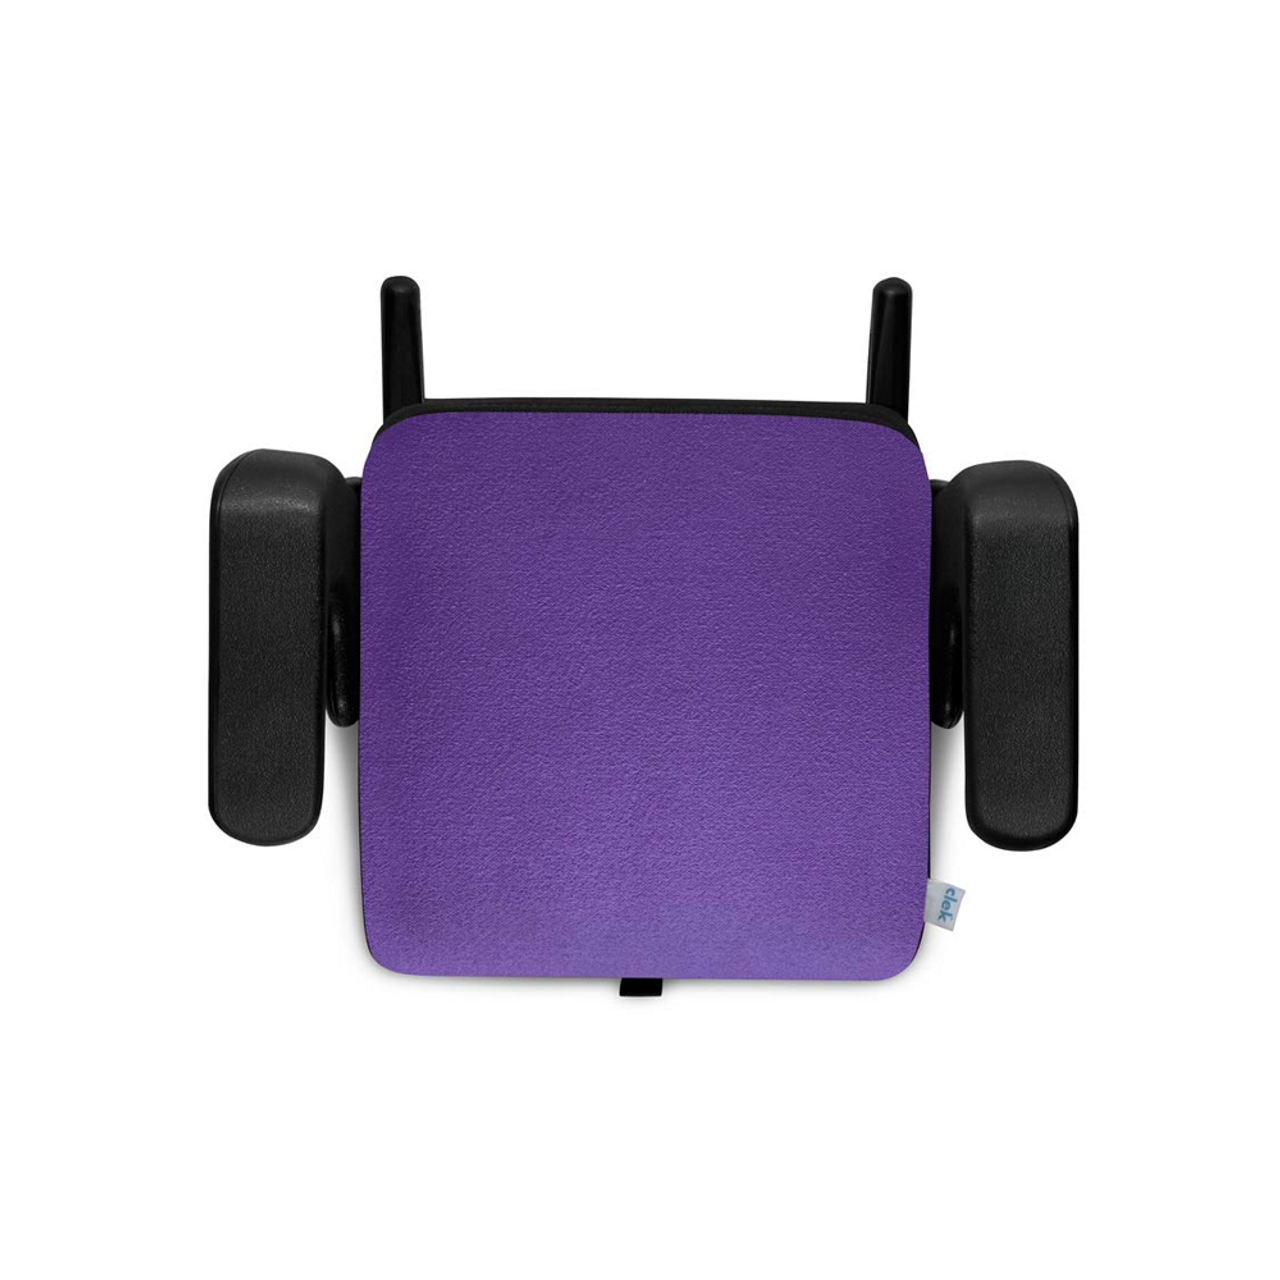 Clek Olli Backless Booster Seat for Kids, Rigid-LATCH